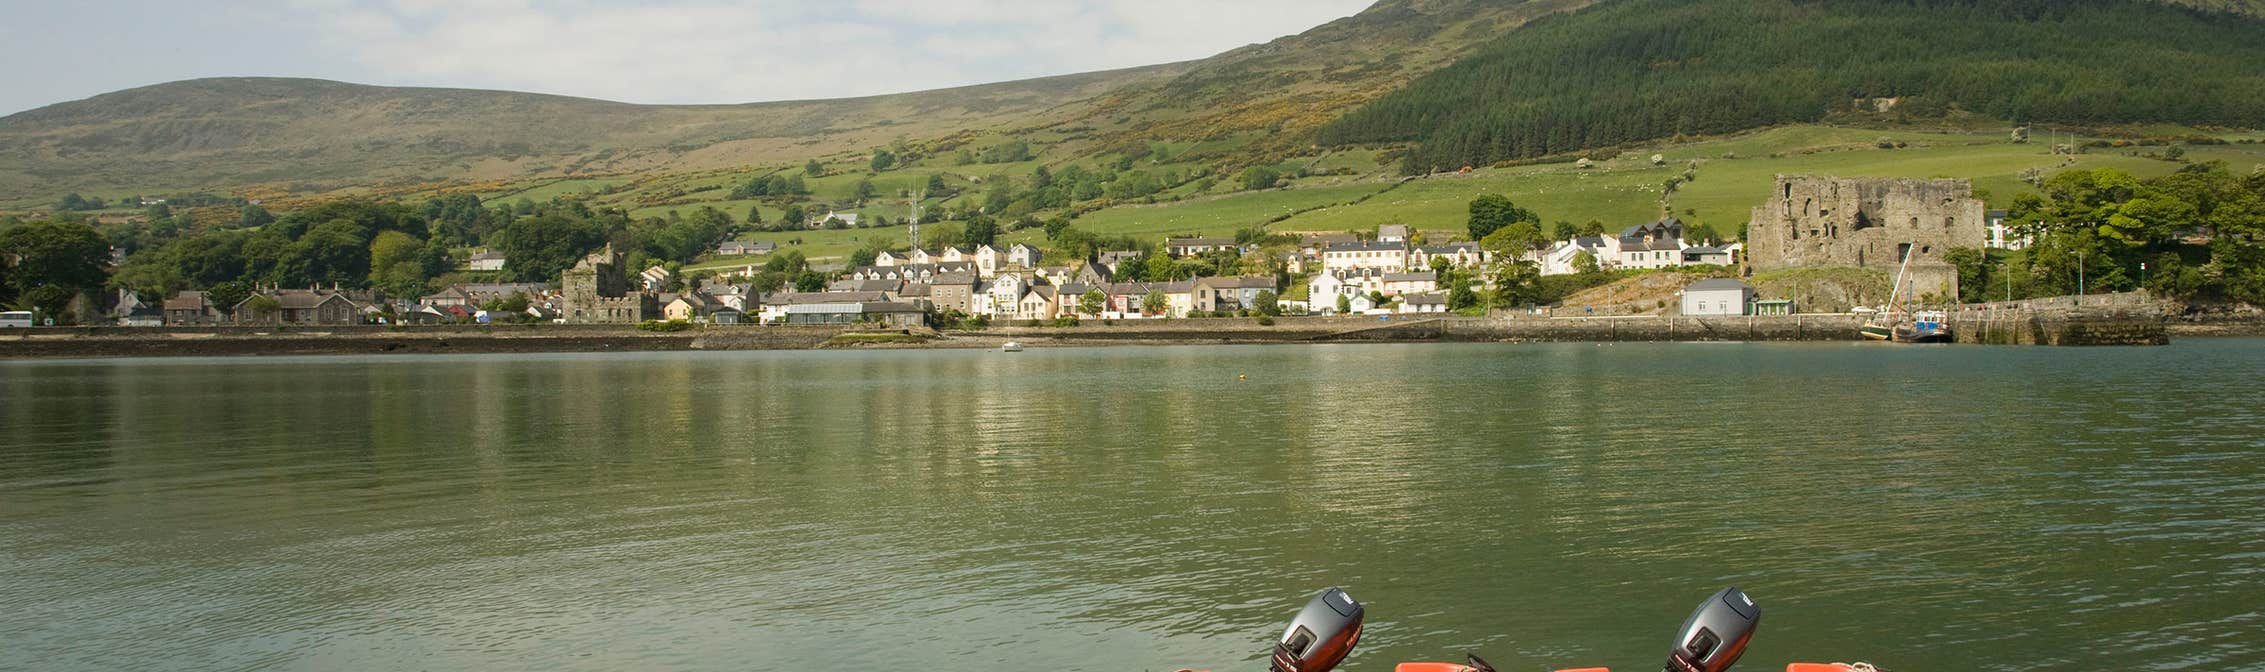 Two orange boats on the water on Carlingford Lough in Louth